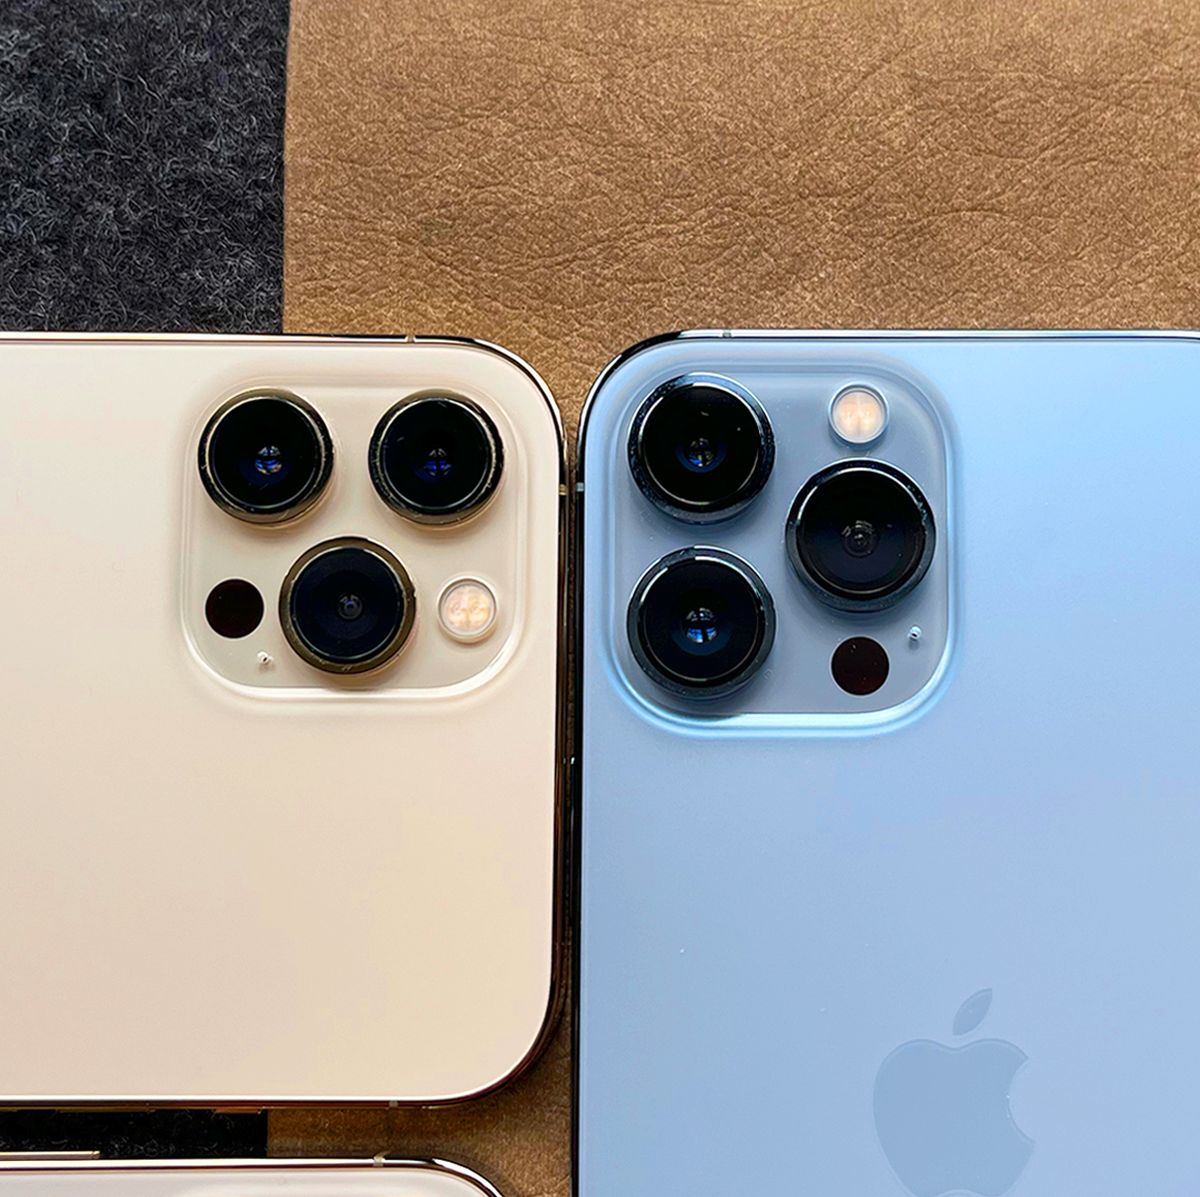 Apple iPhone 13 Pro Max review: Camera: Hardware and app